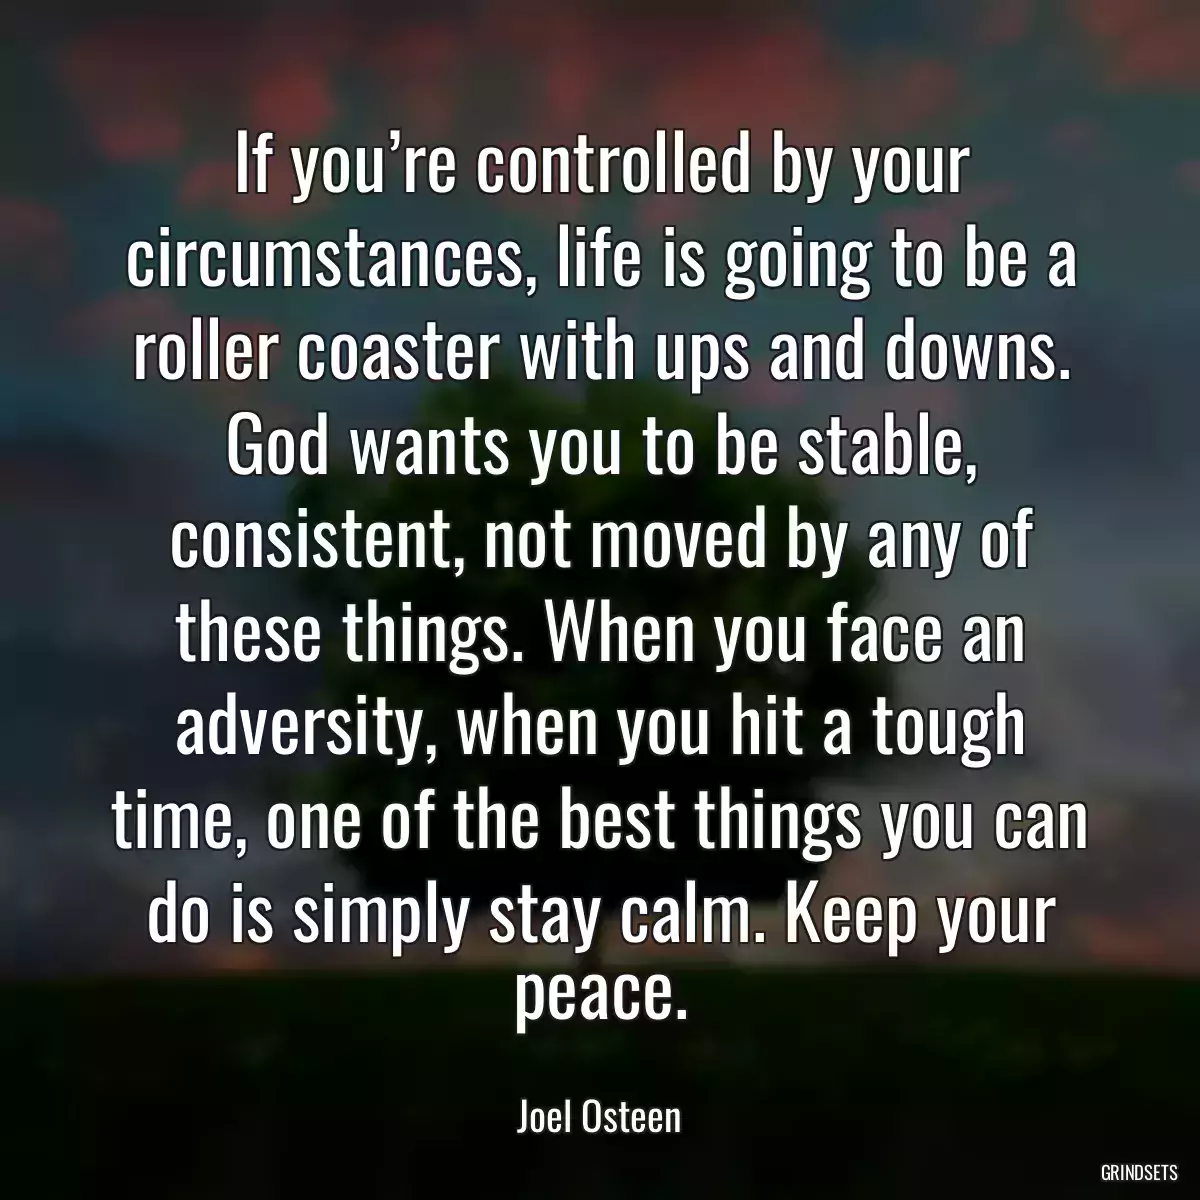 If you’re controlled by your circumstances, life is going to be a roller coaster with ups and downs. God wants you to be stable, consistent, not moved by any of these things. When you face an adversity, when you hit a tough time, one of the best things you can do is simply stay calm. Keep your peace.